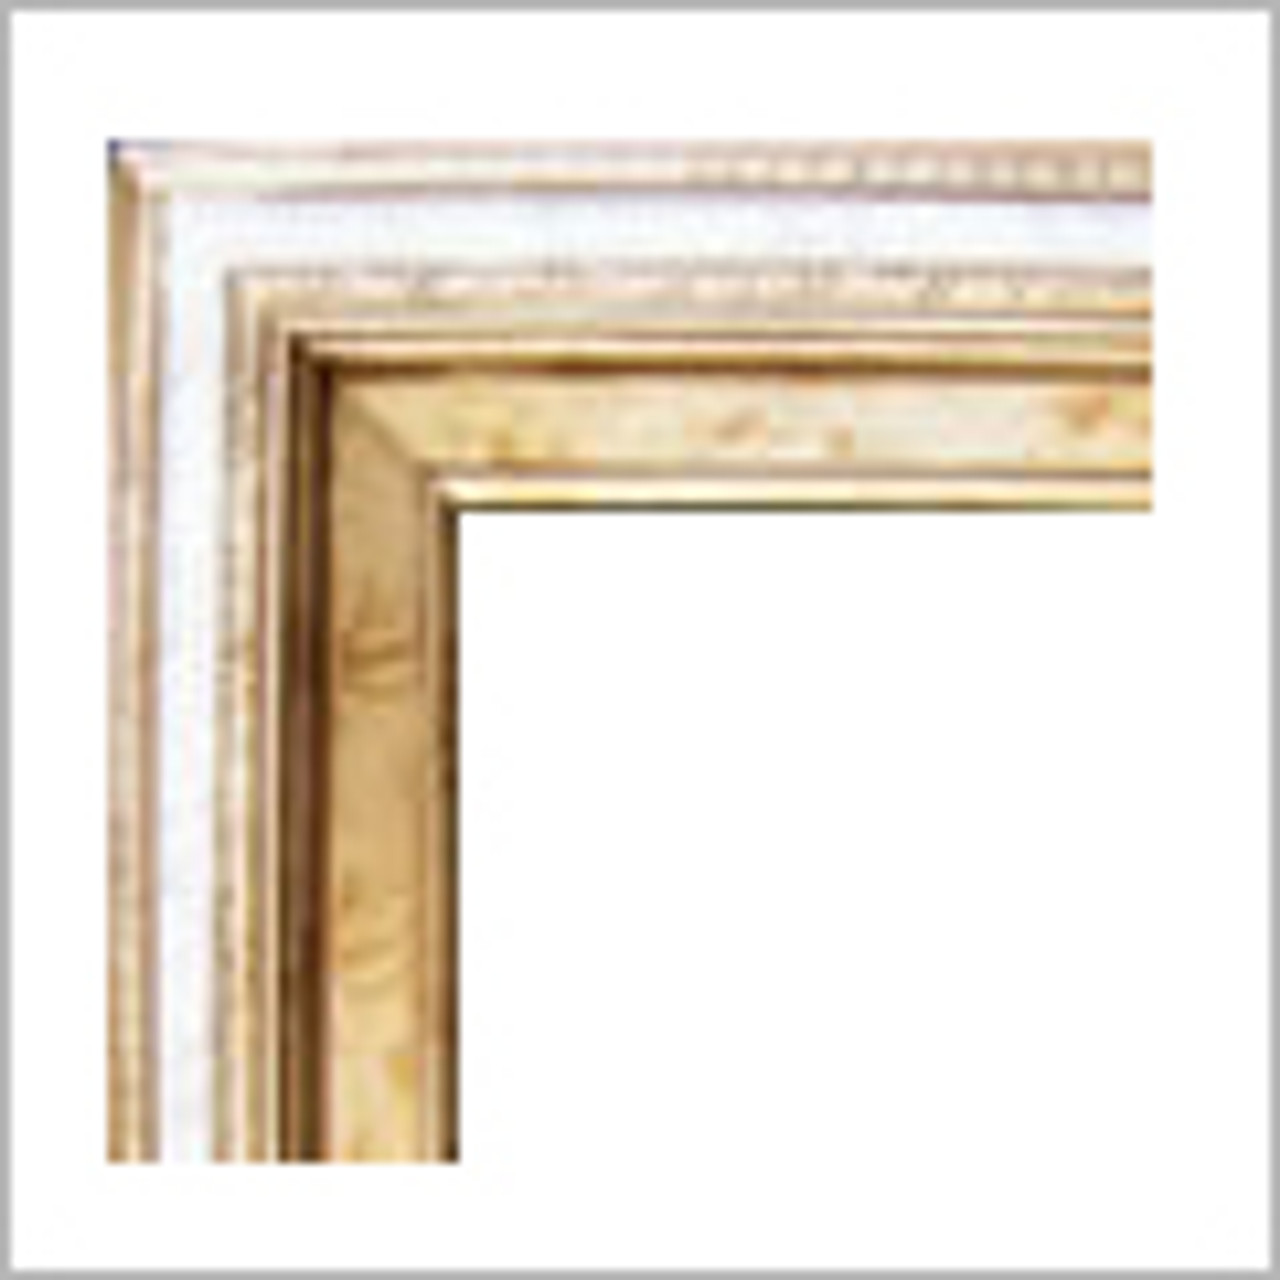  3 Inch Deluxe Wood Frames: 20X20*